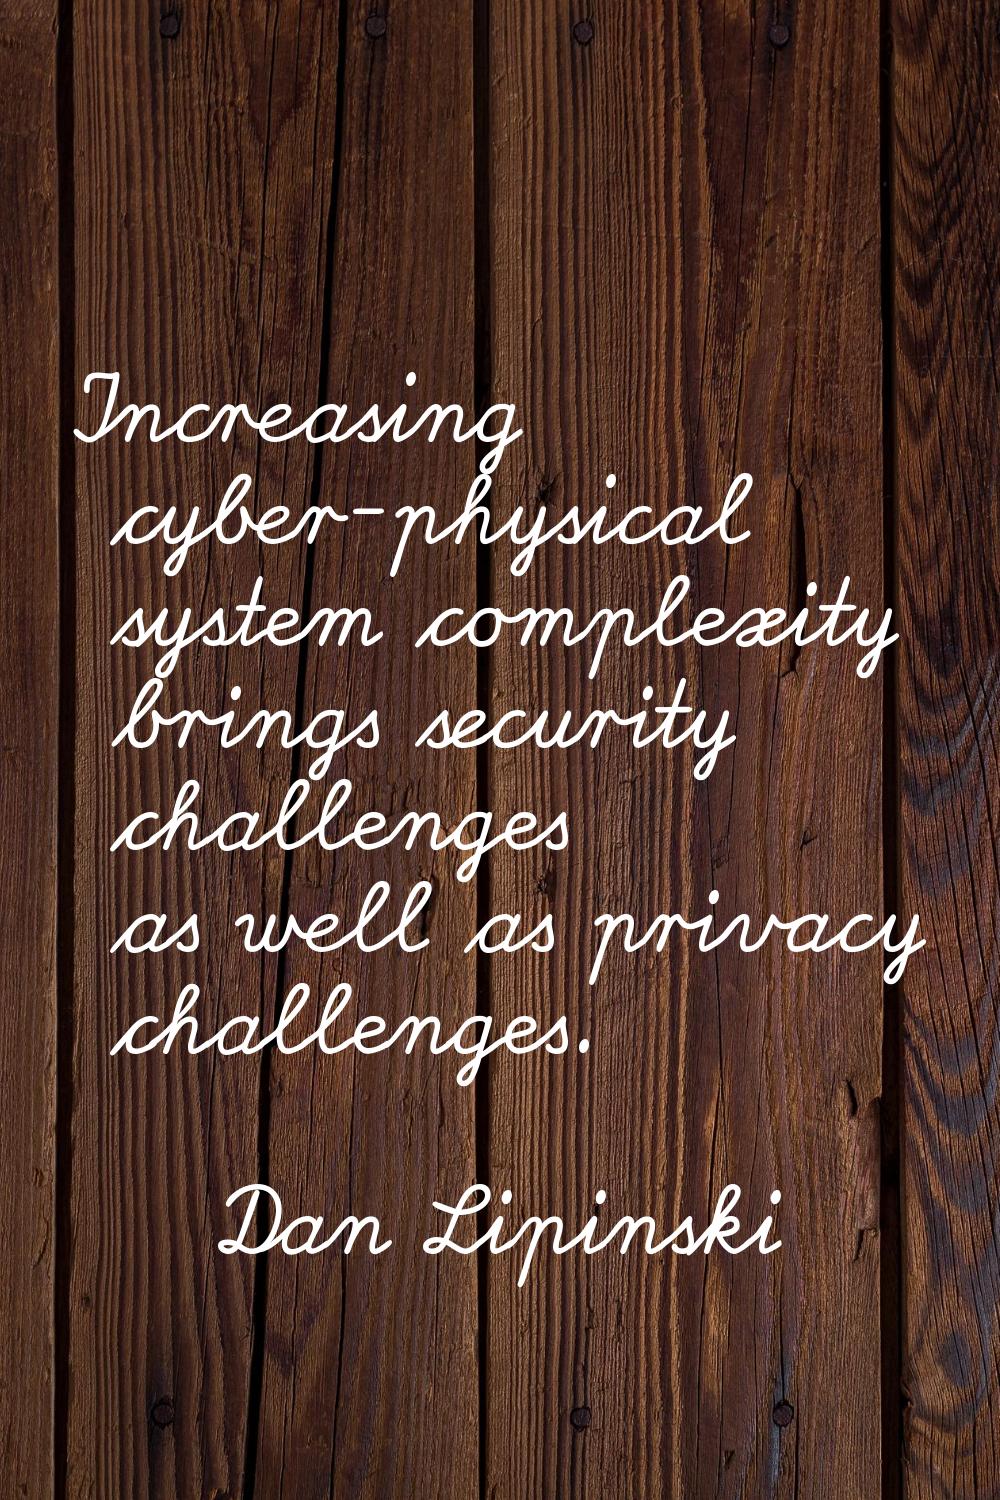 Increasing cyber-physical system complexity brings security challenges as well as privacy challenge